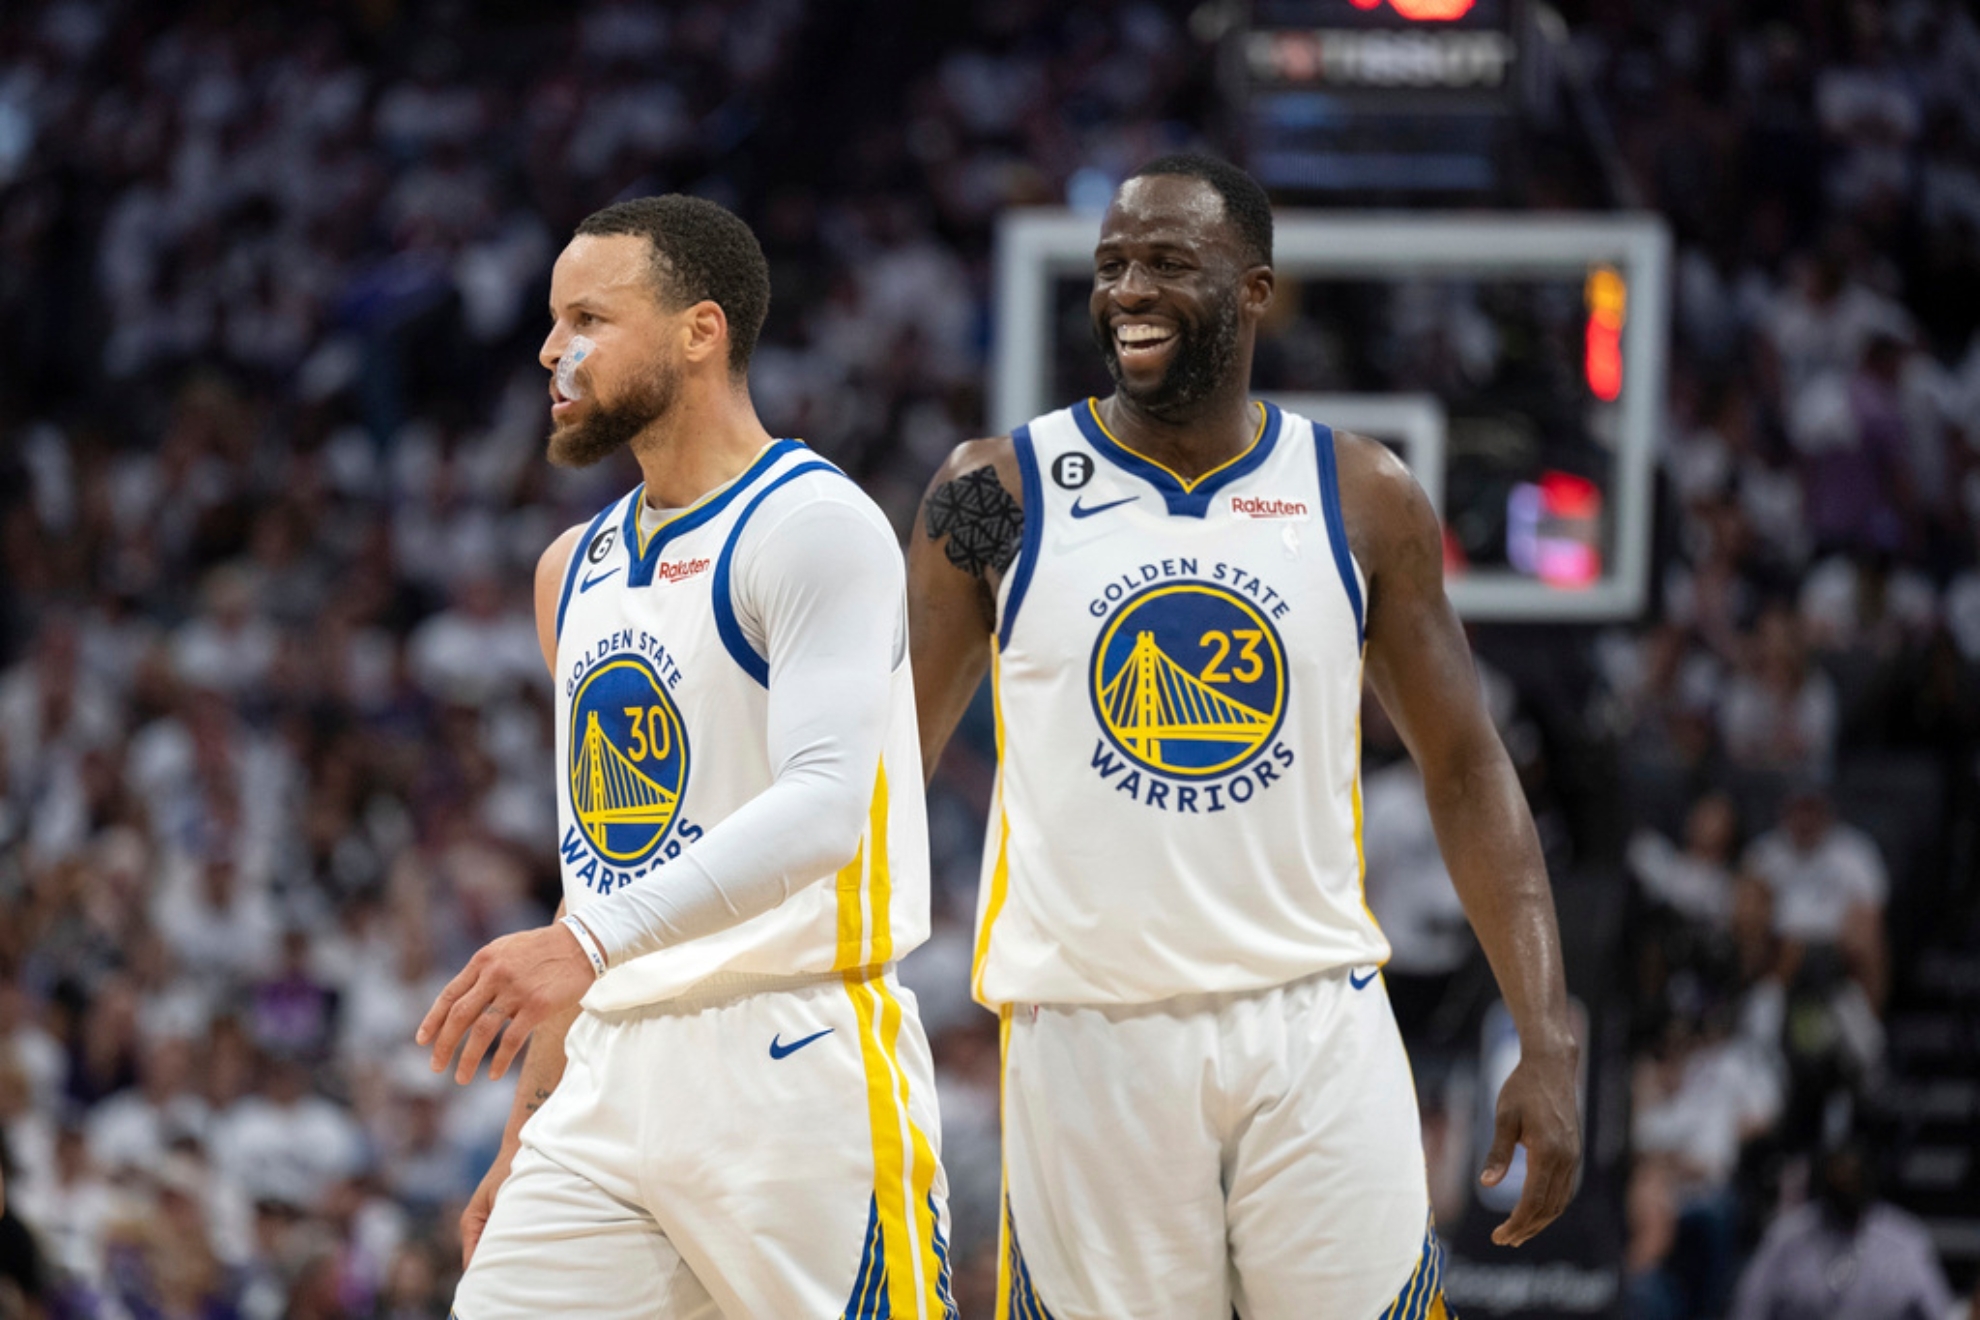 Draymond recently signed an extension with the Warriors